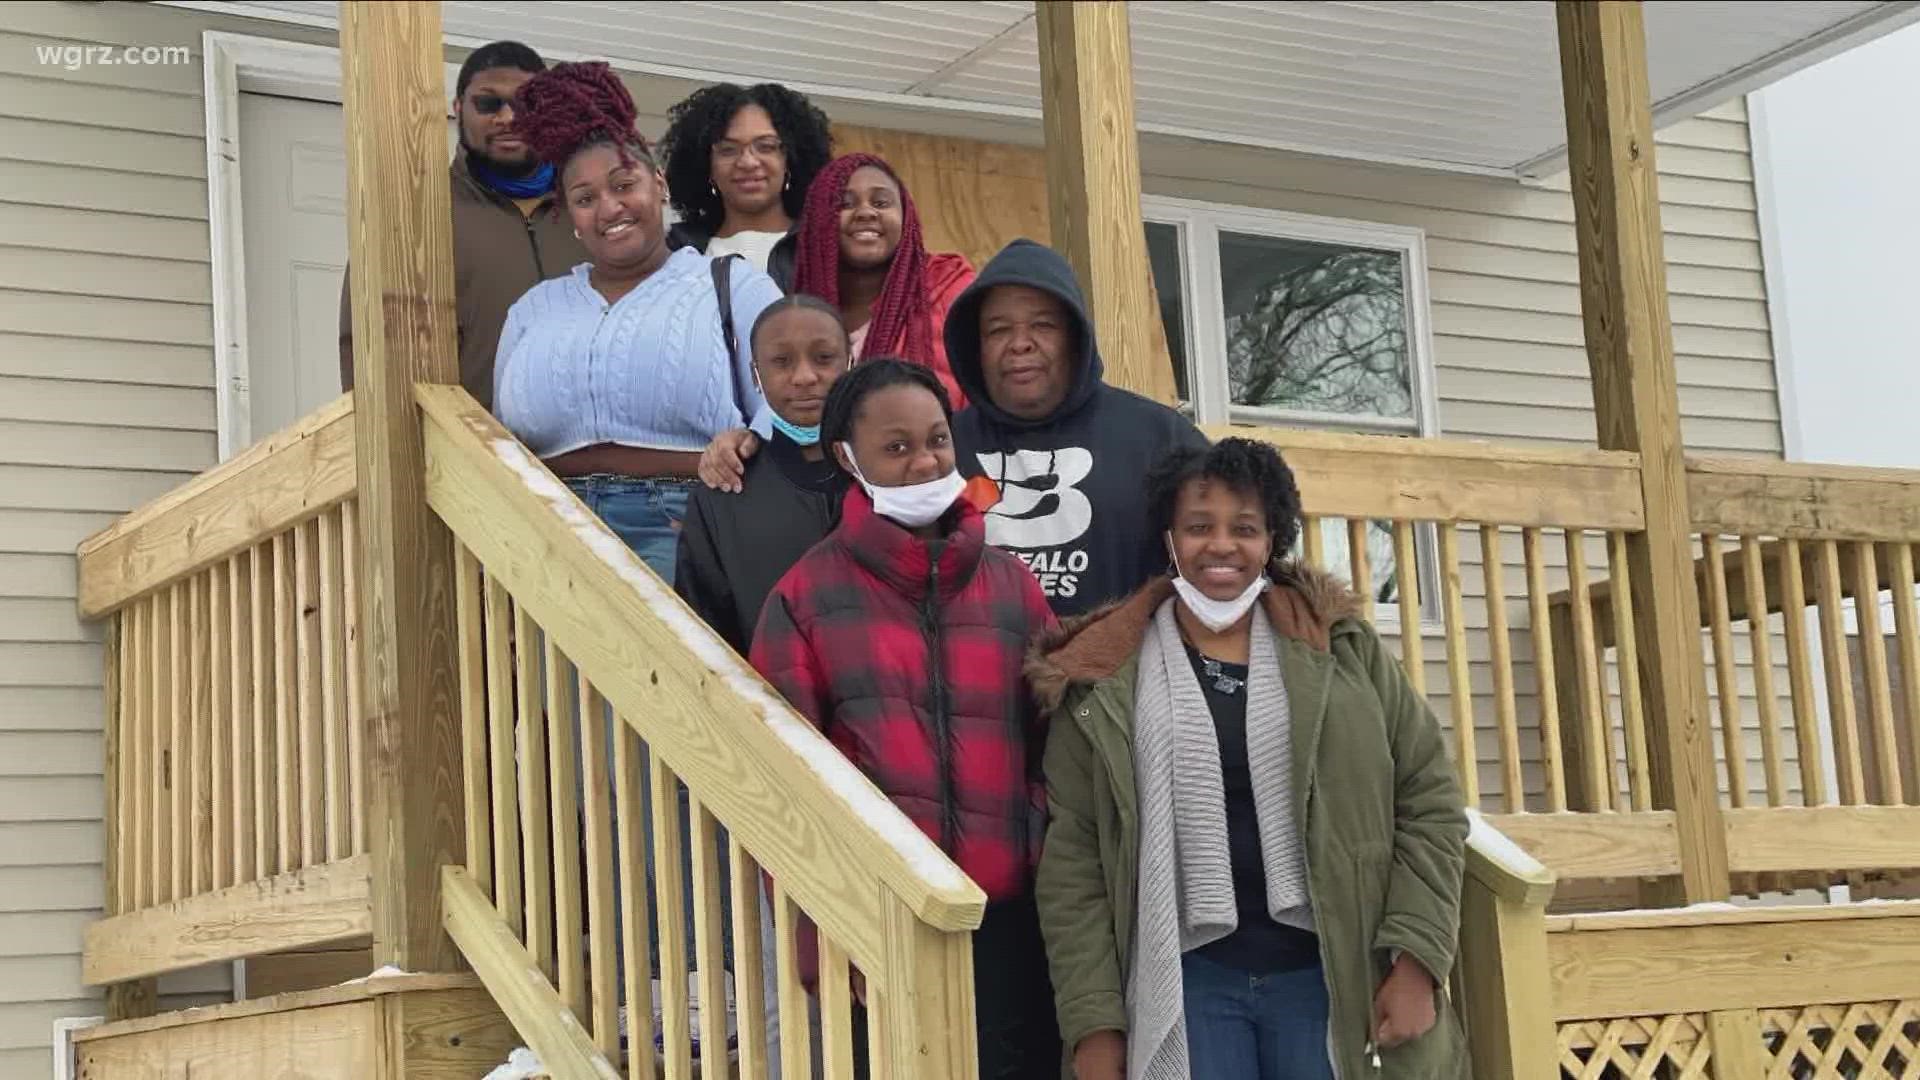 After a nearly two-year delay, Habitat for Humanity Buffalo dedicated the "House that Beer Built" on Saturday.